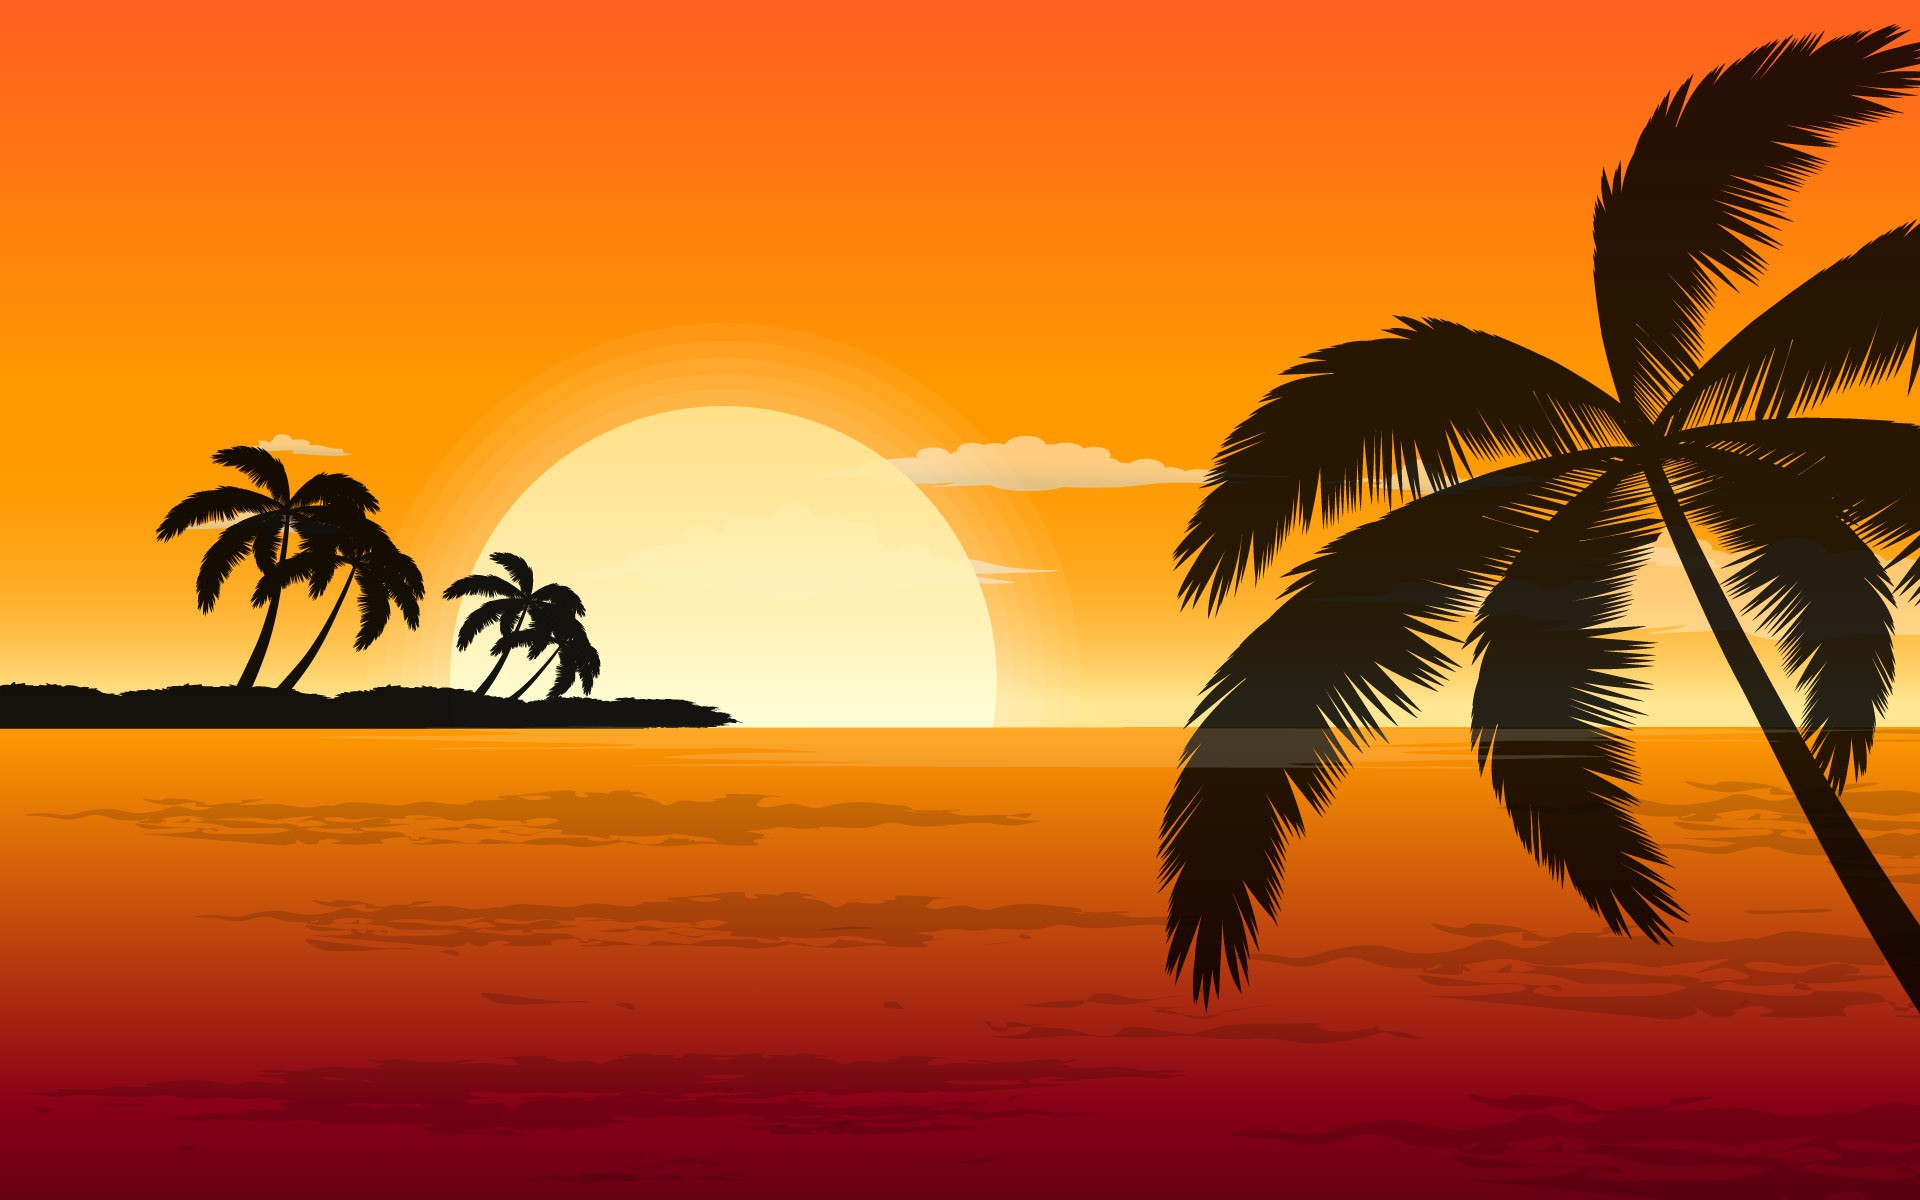  palm trees sunset wallpapers palm trees sunset wallpapers palm trees